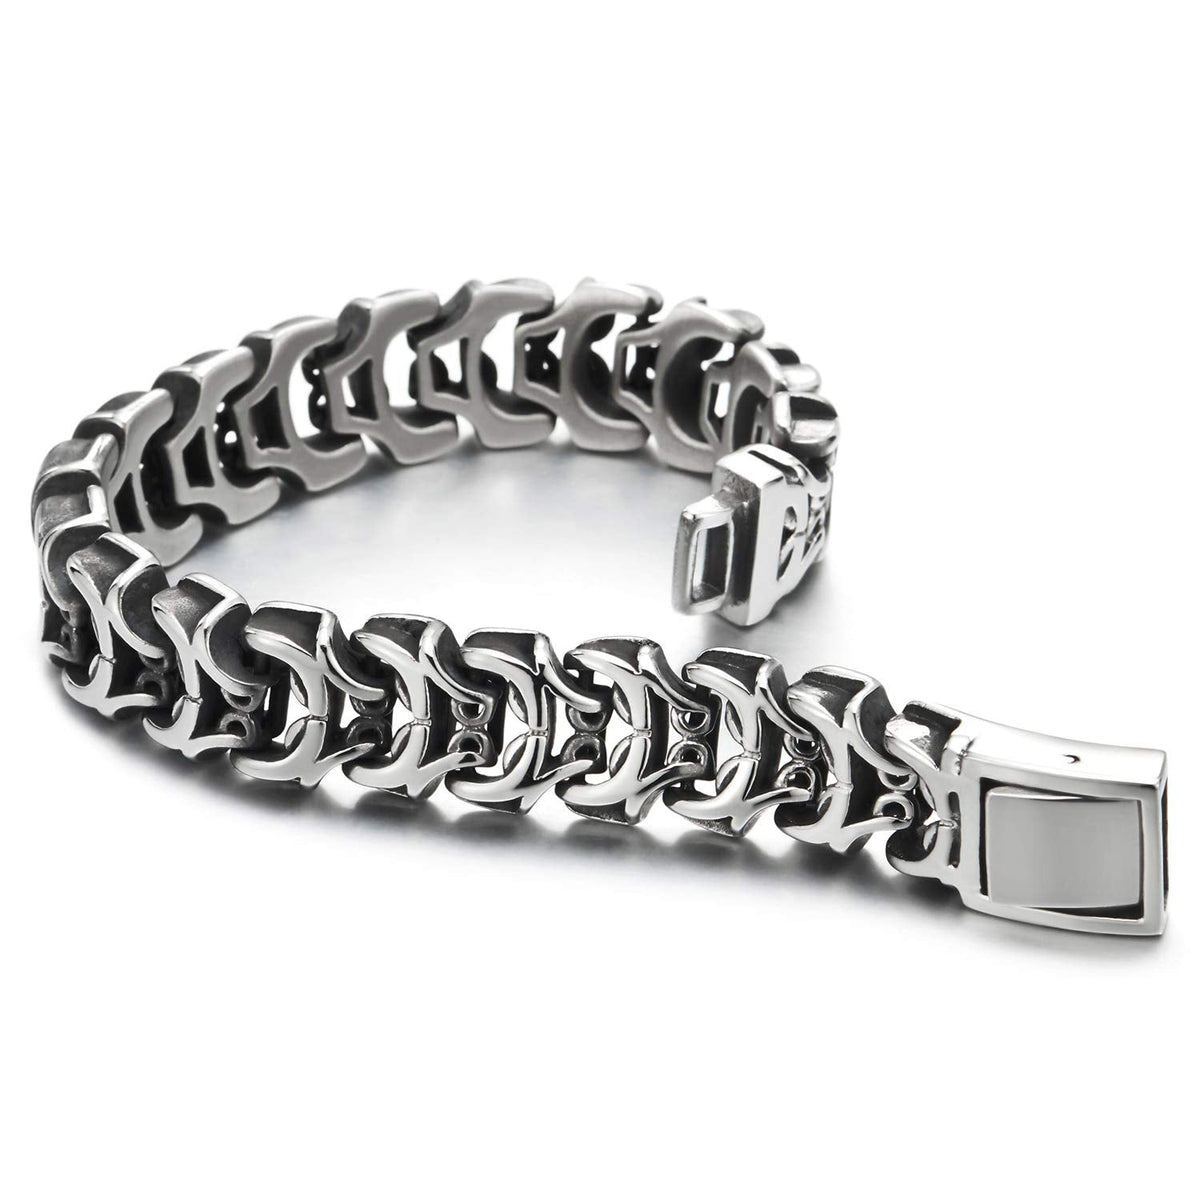 Masculine Style, Mens Vintage Mechanic Link Chain Bracelet with Box ...